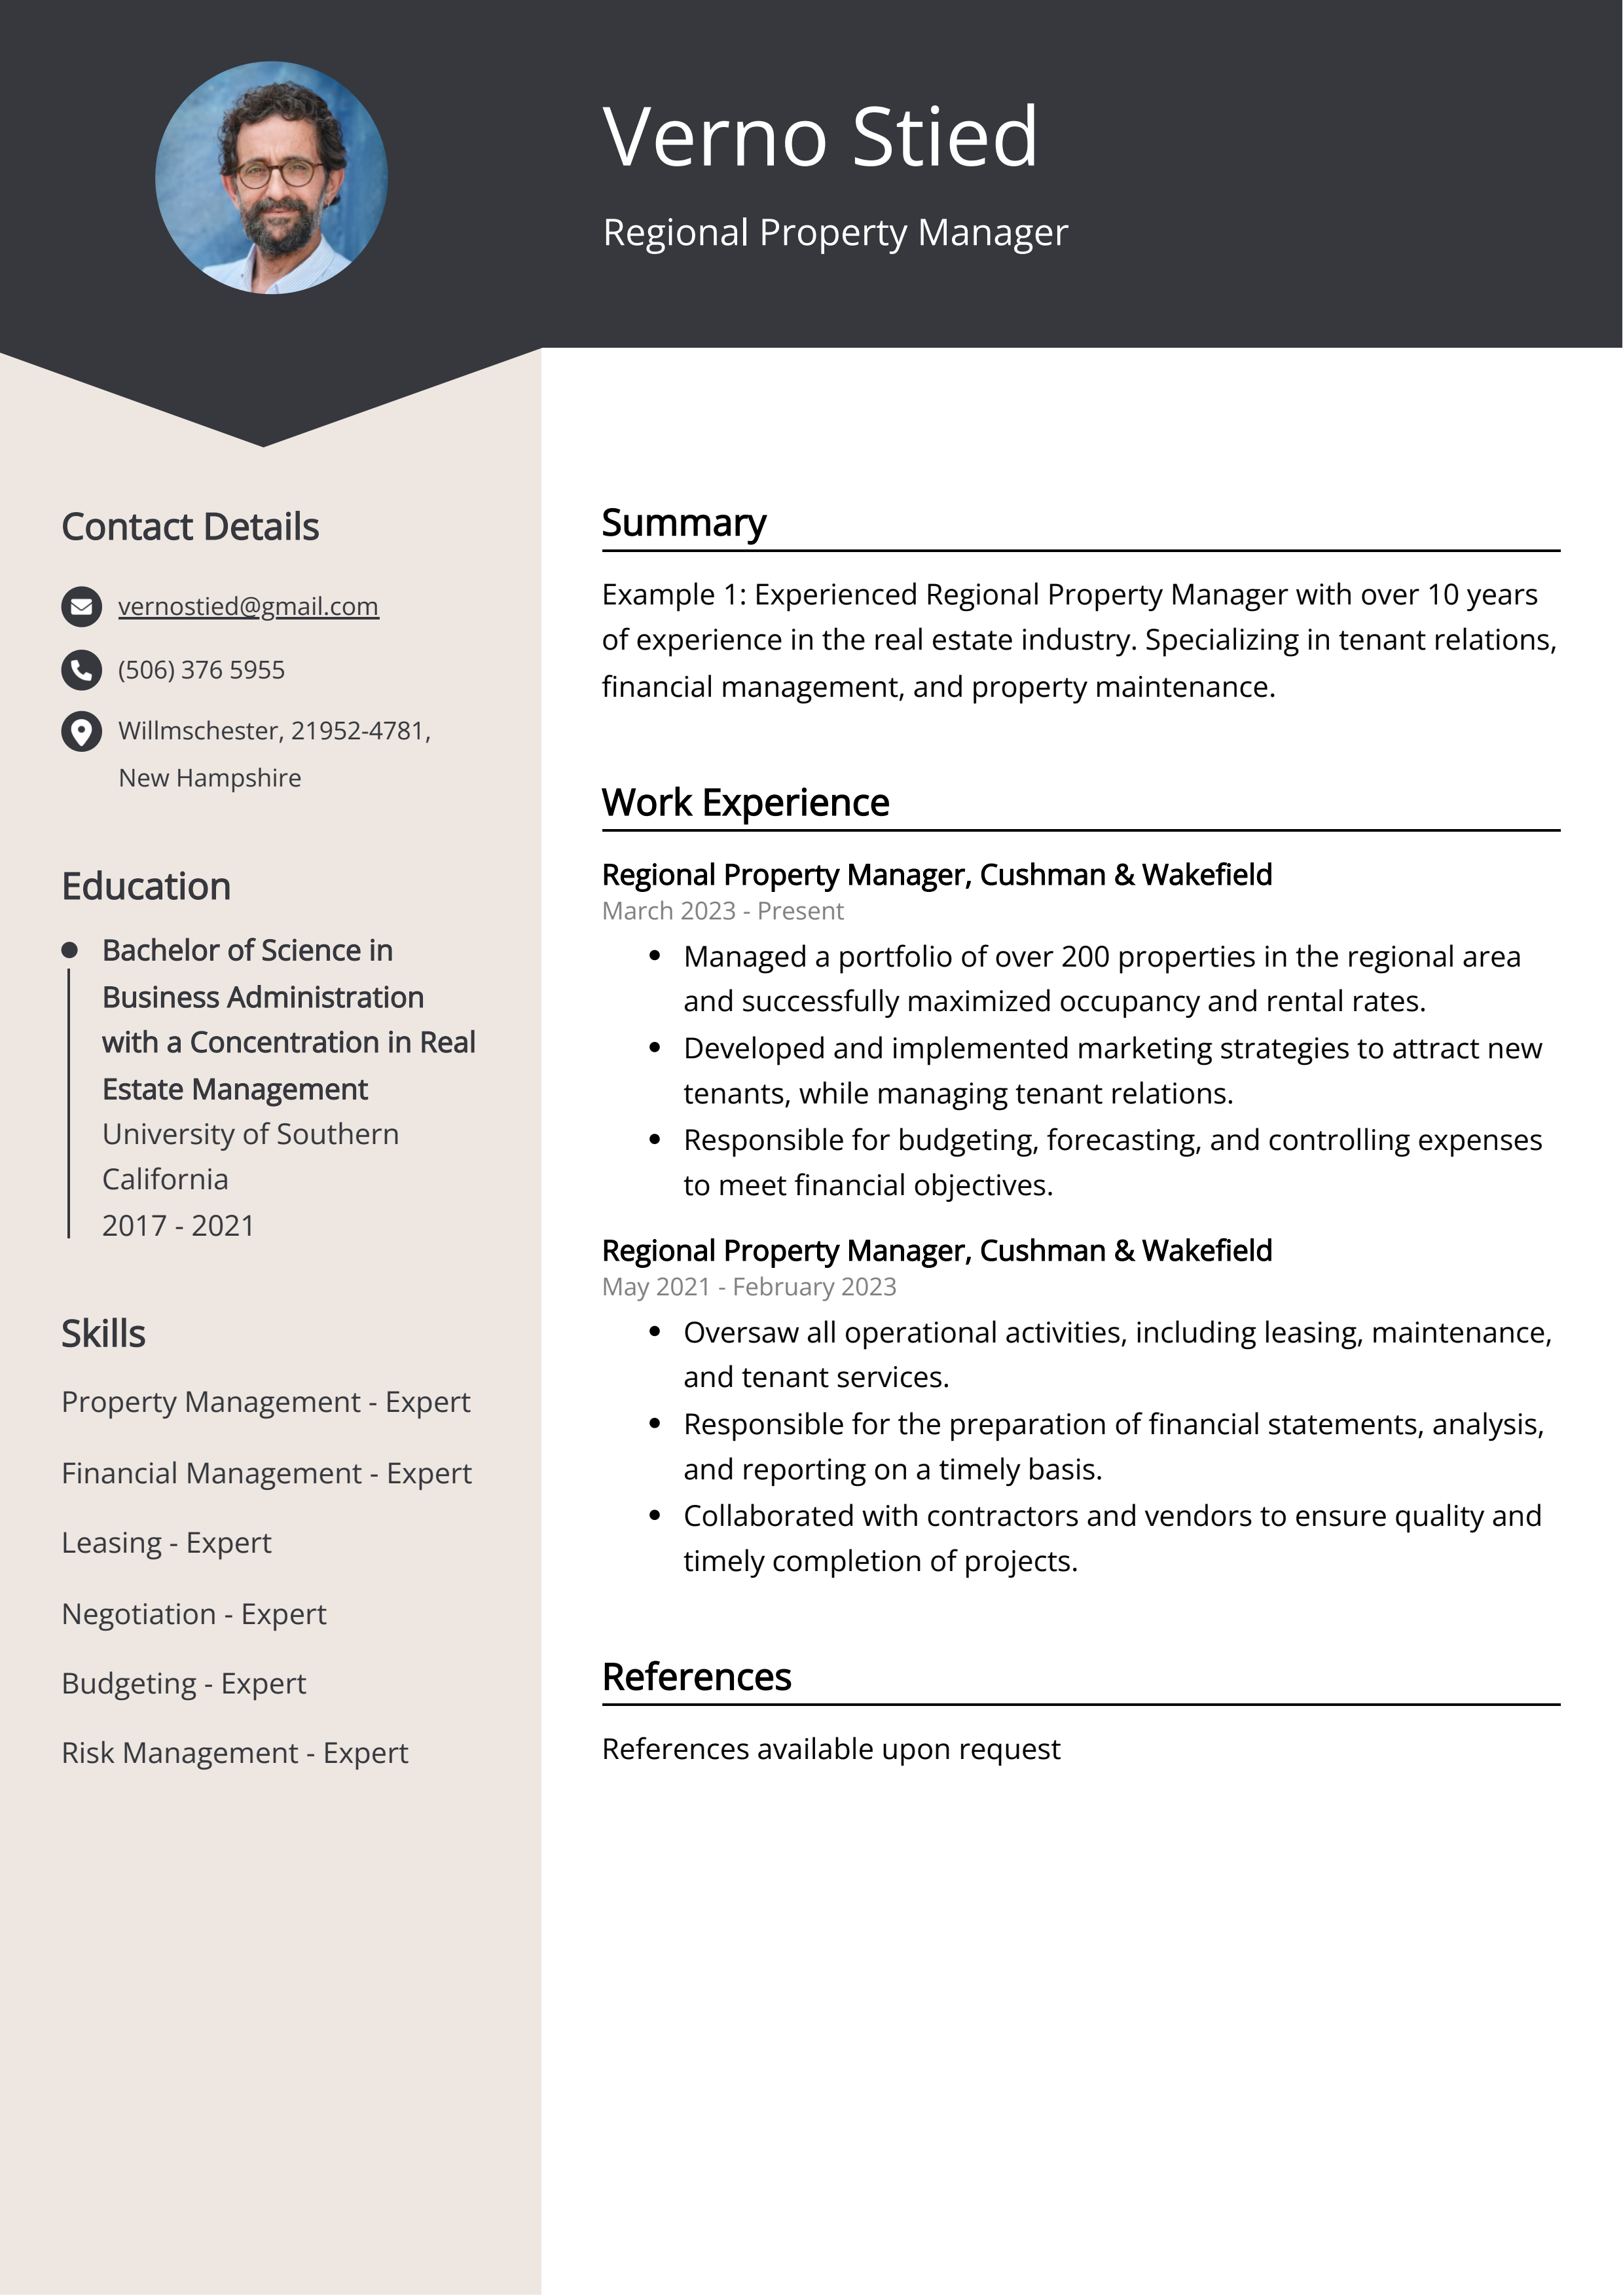 Regional Property Manager CV Example